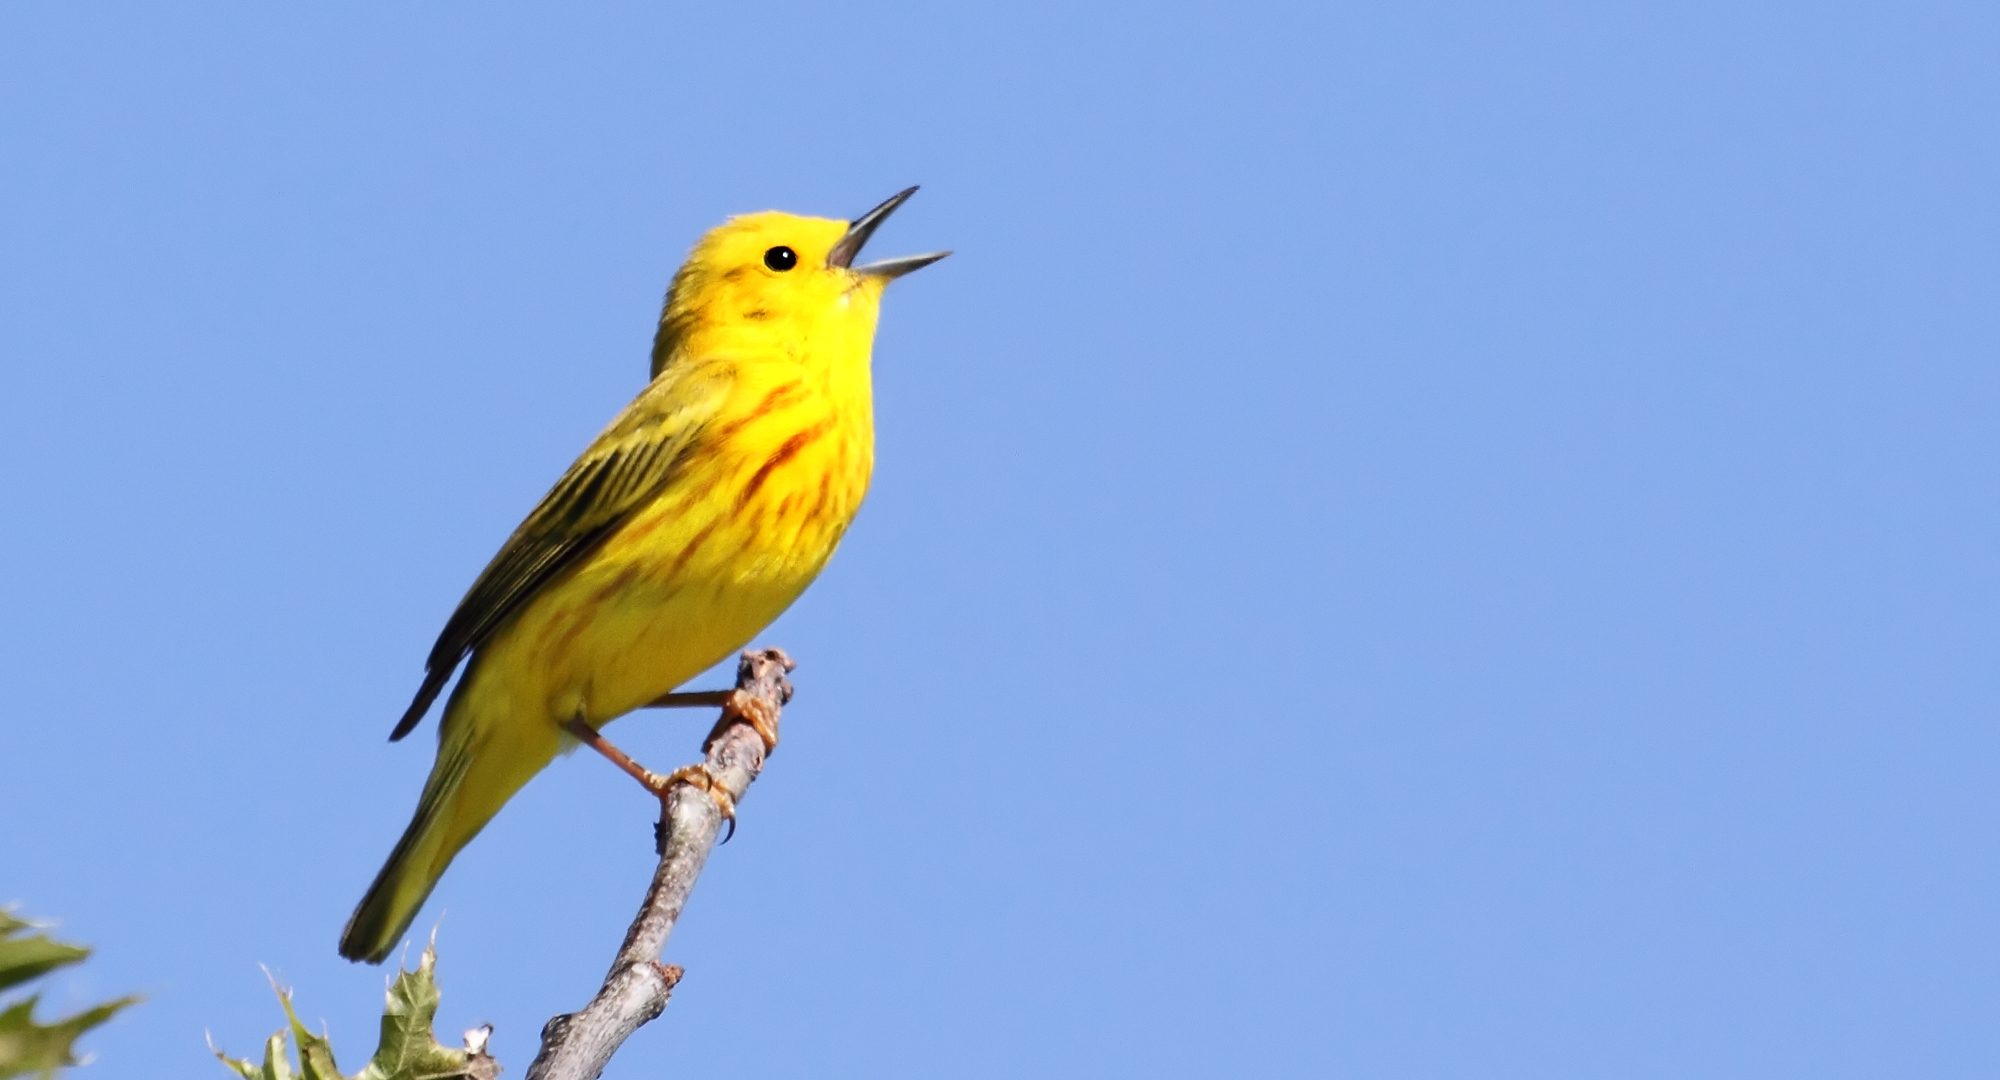 Yellow Warbler (Dendroica petechia) singing his heart out